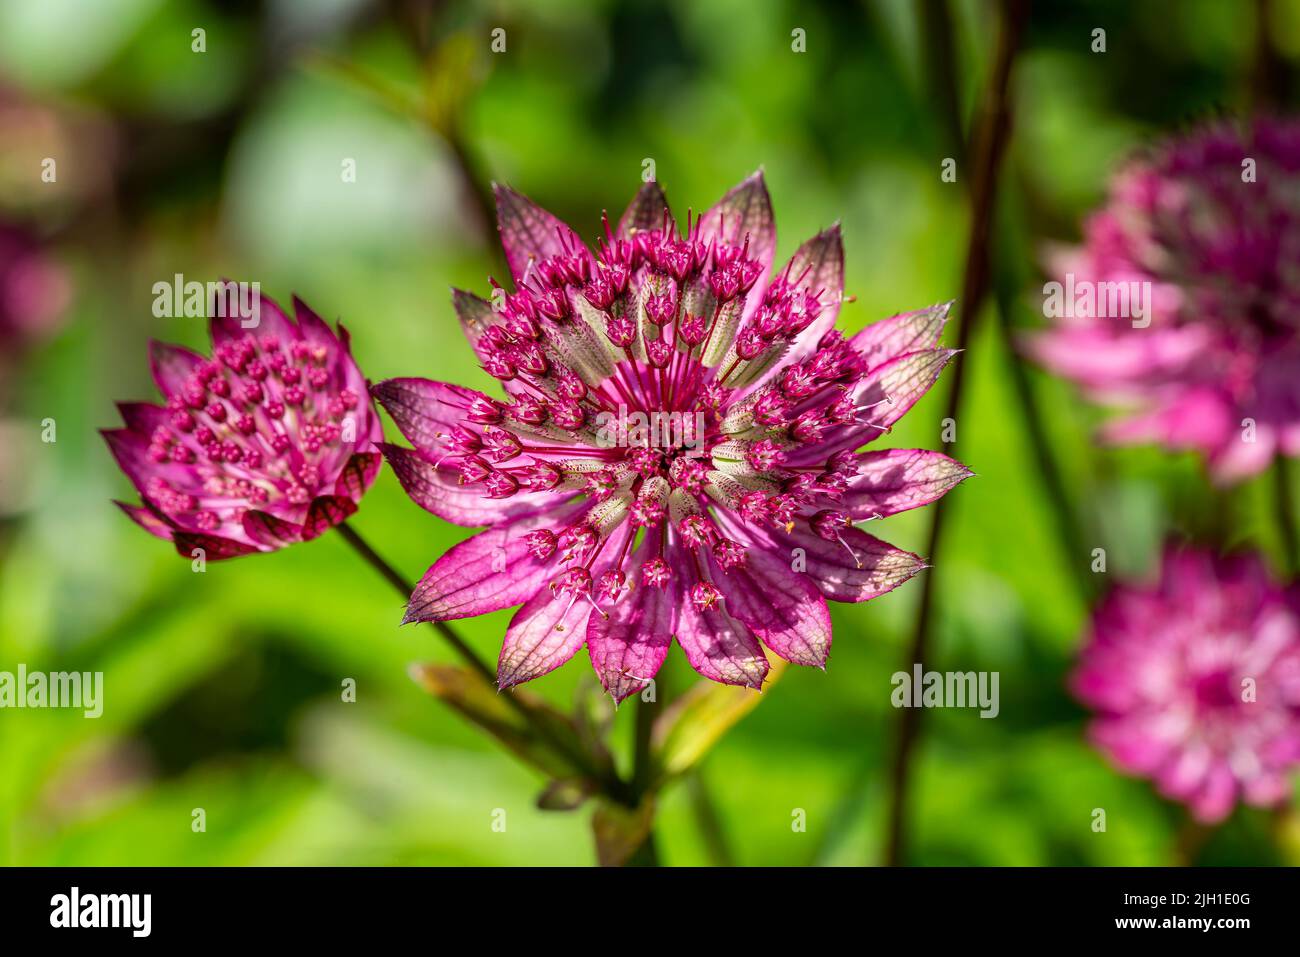 Astrantia major Gill Richardson Group a summer autumn fall flowering plant with a crimson red summertime flower commonly known as great black masterwo Stock Photo